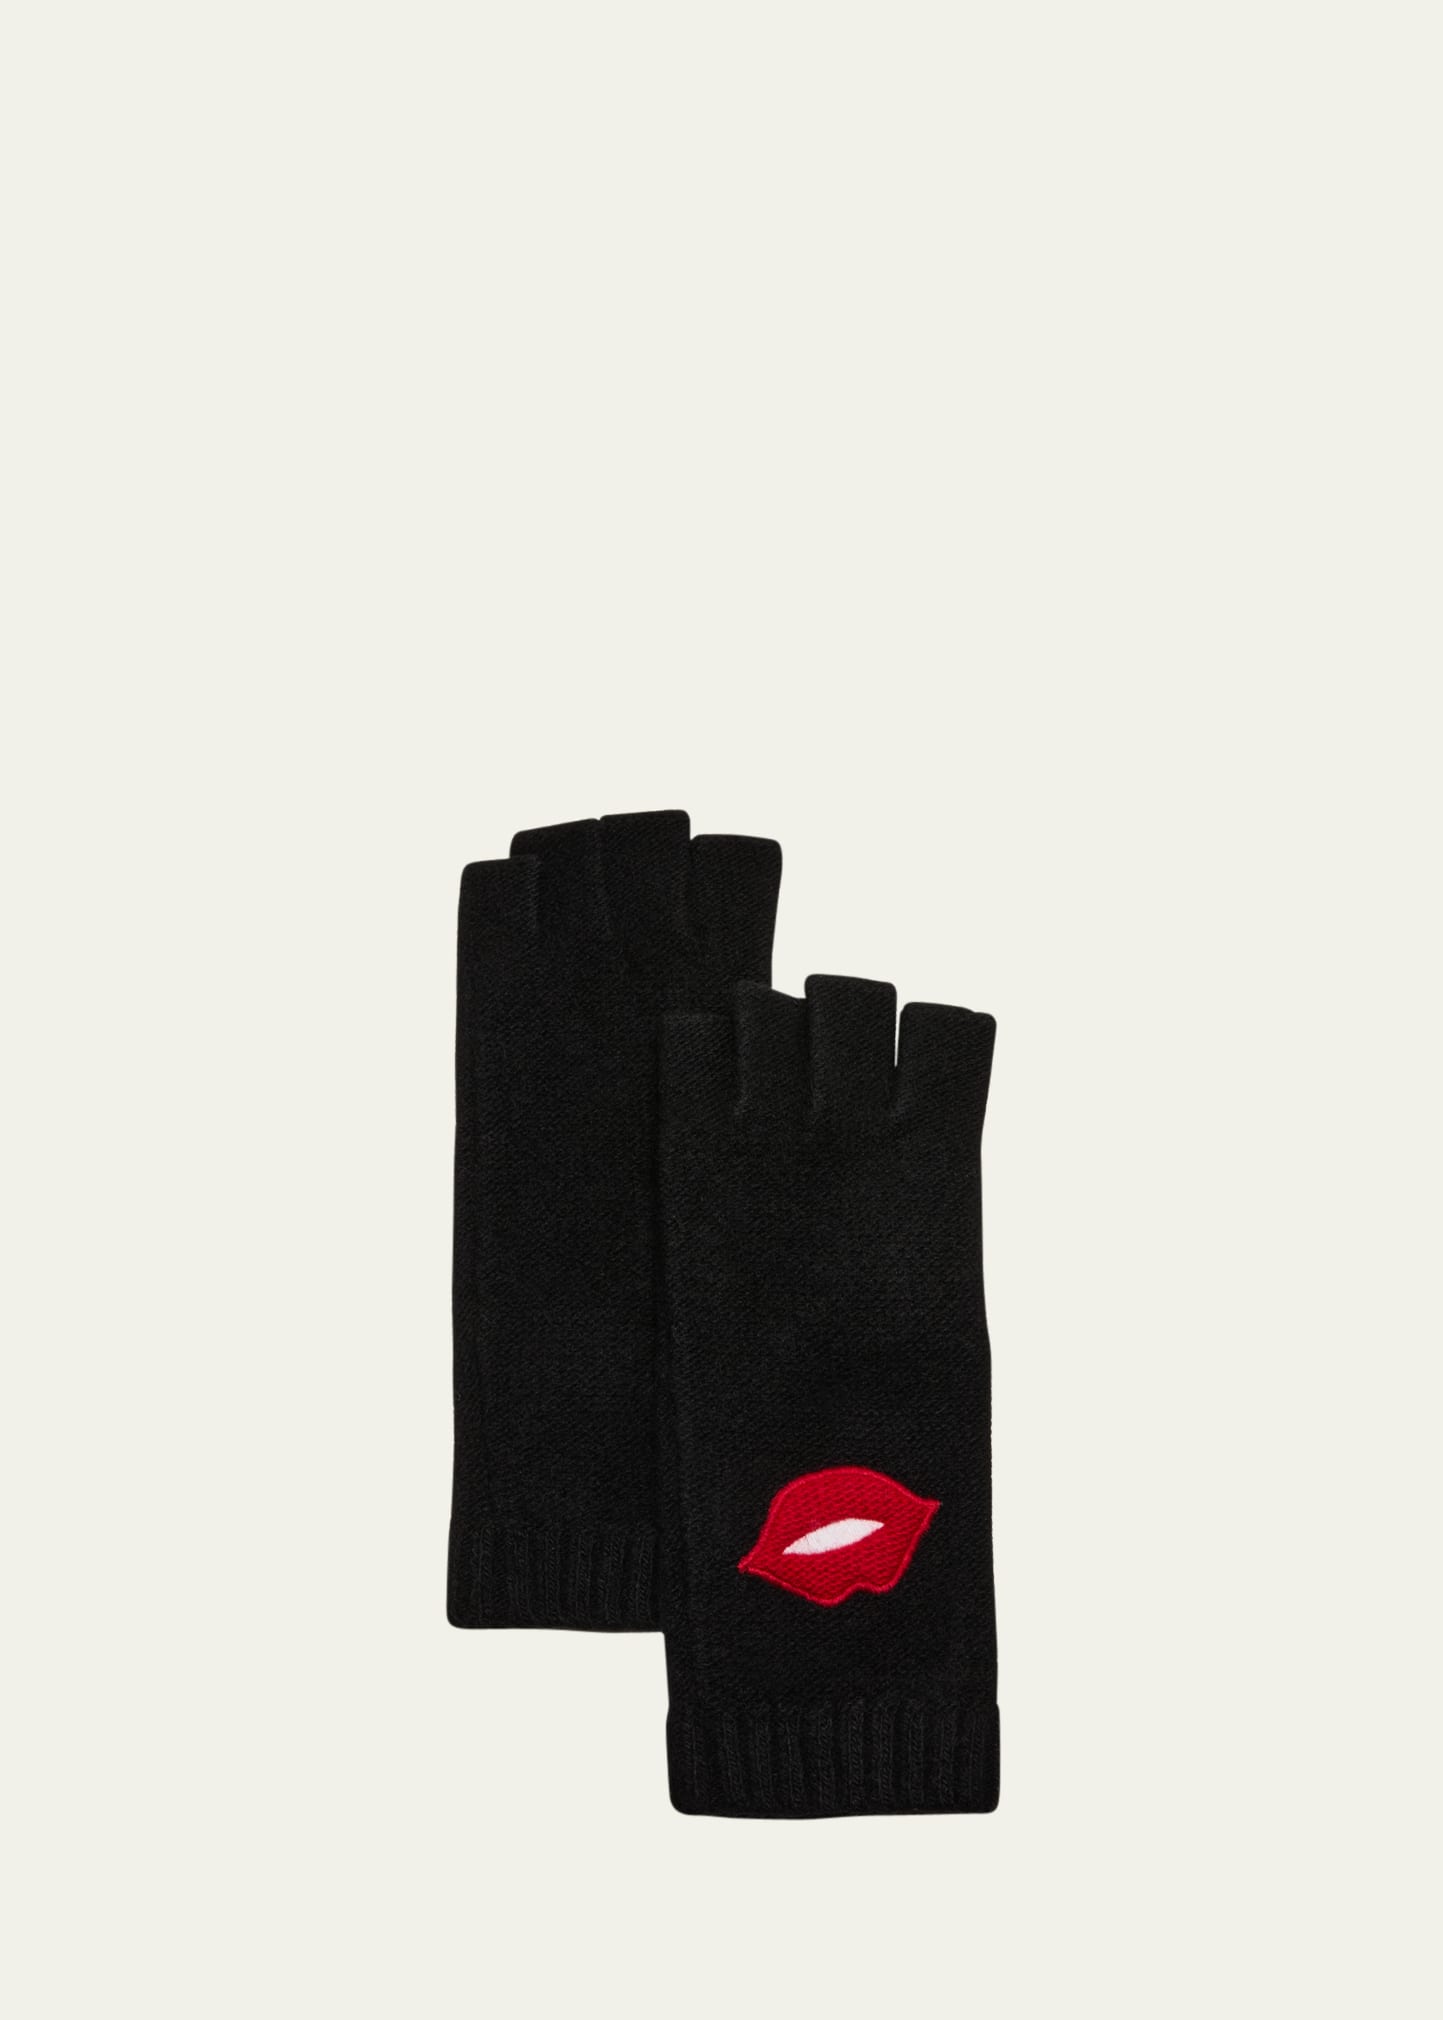 Fingerless Cashmere Gloves With Lips Motif